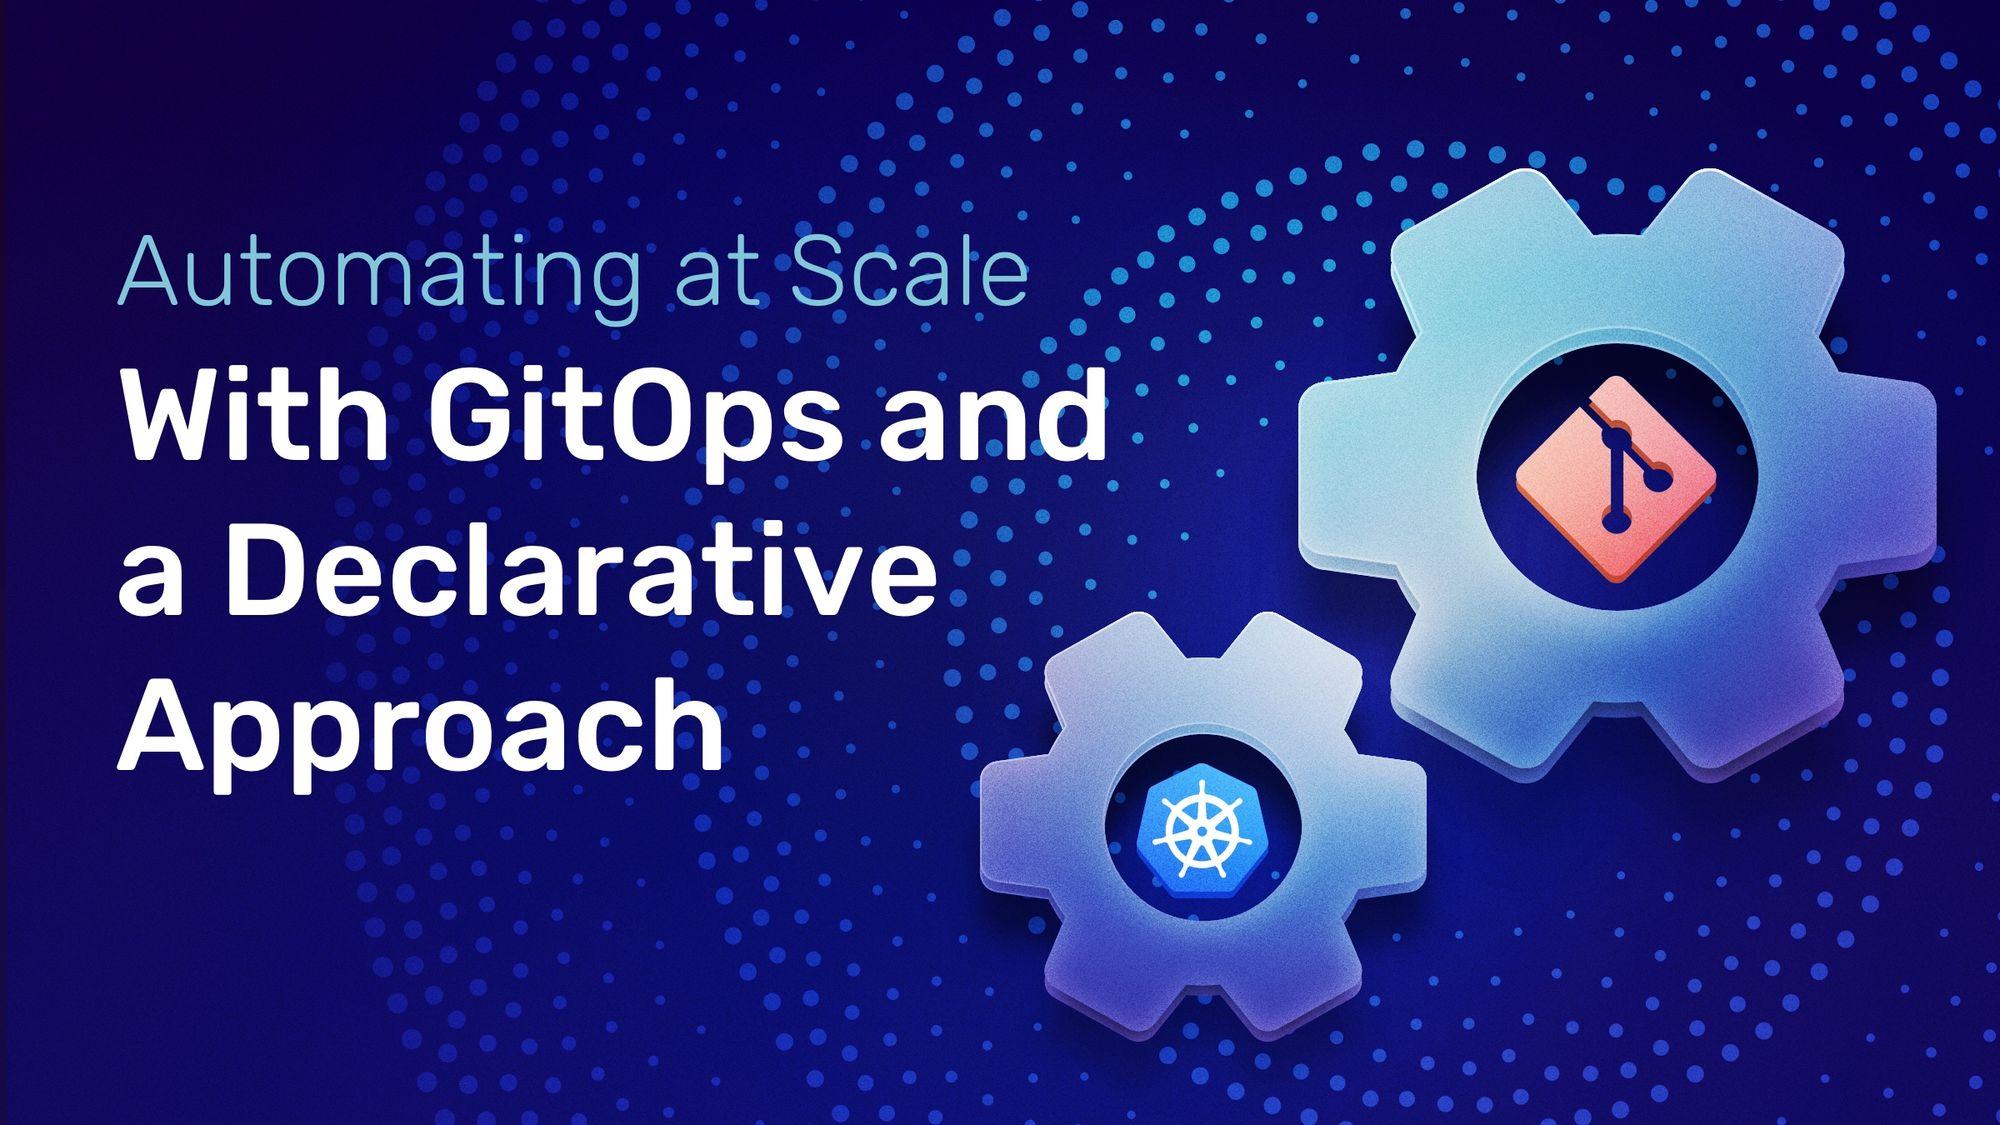 gitops and declarative approach